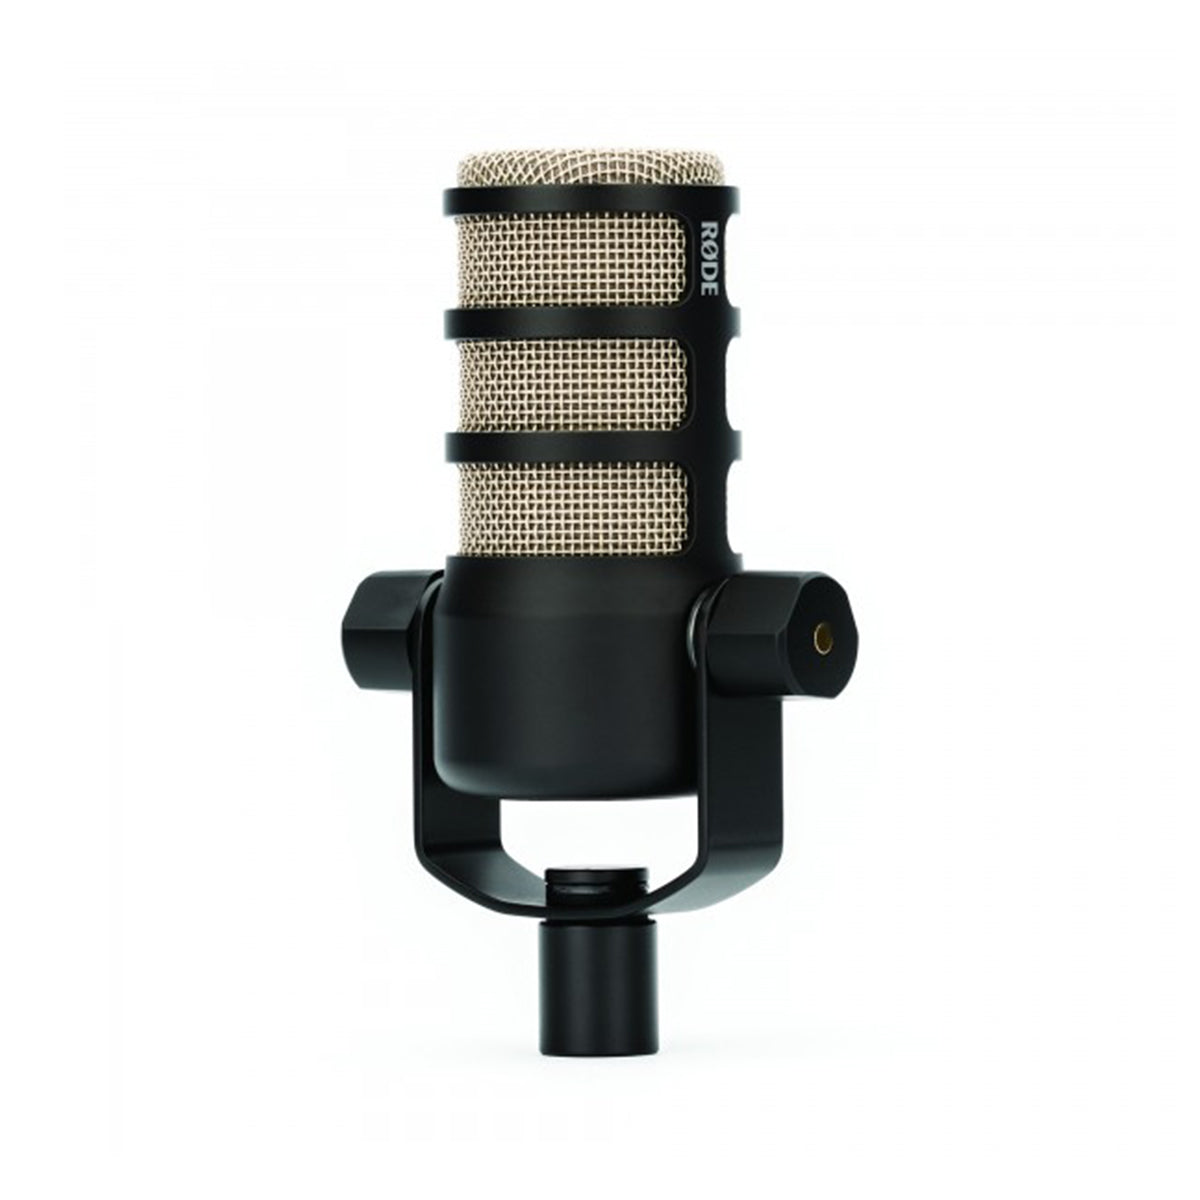 RODE PodMic Dynamic Podcasting Microphone *OPEN BOX*